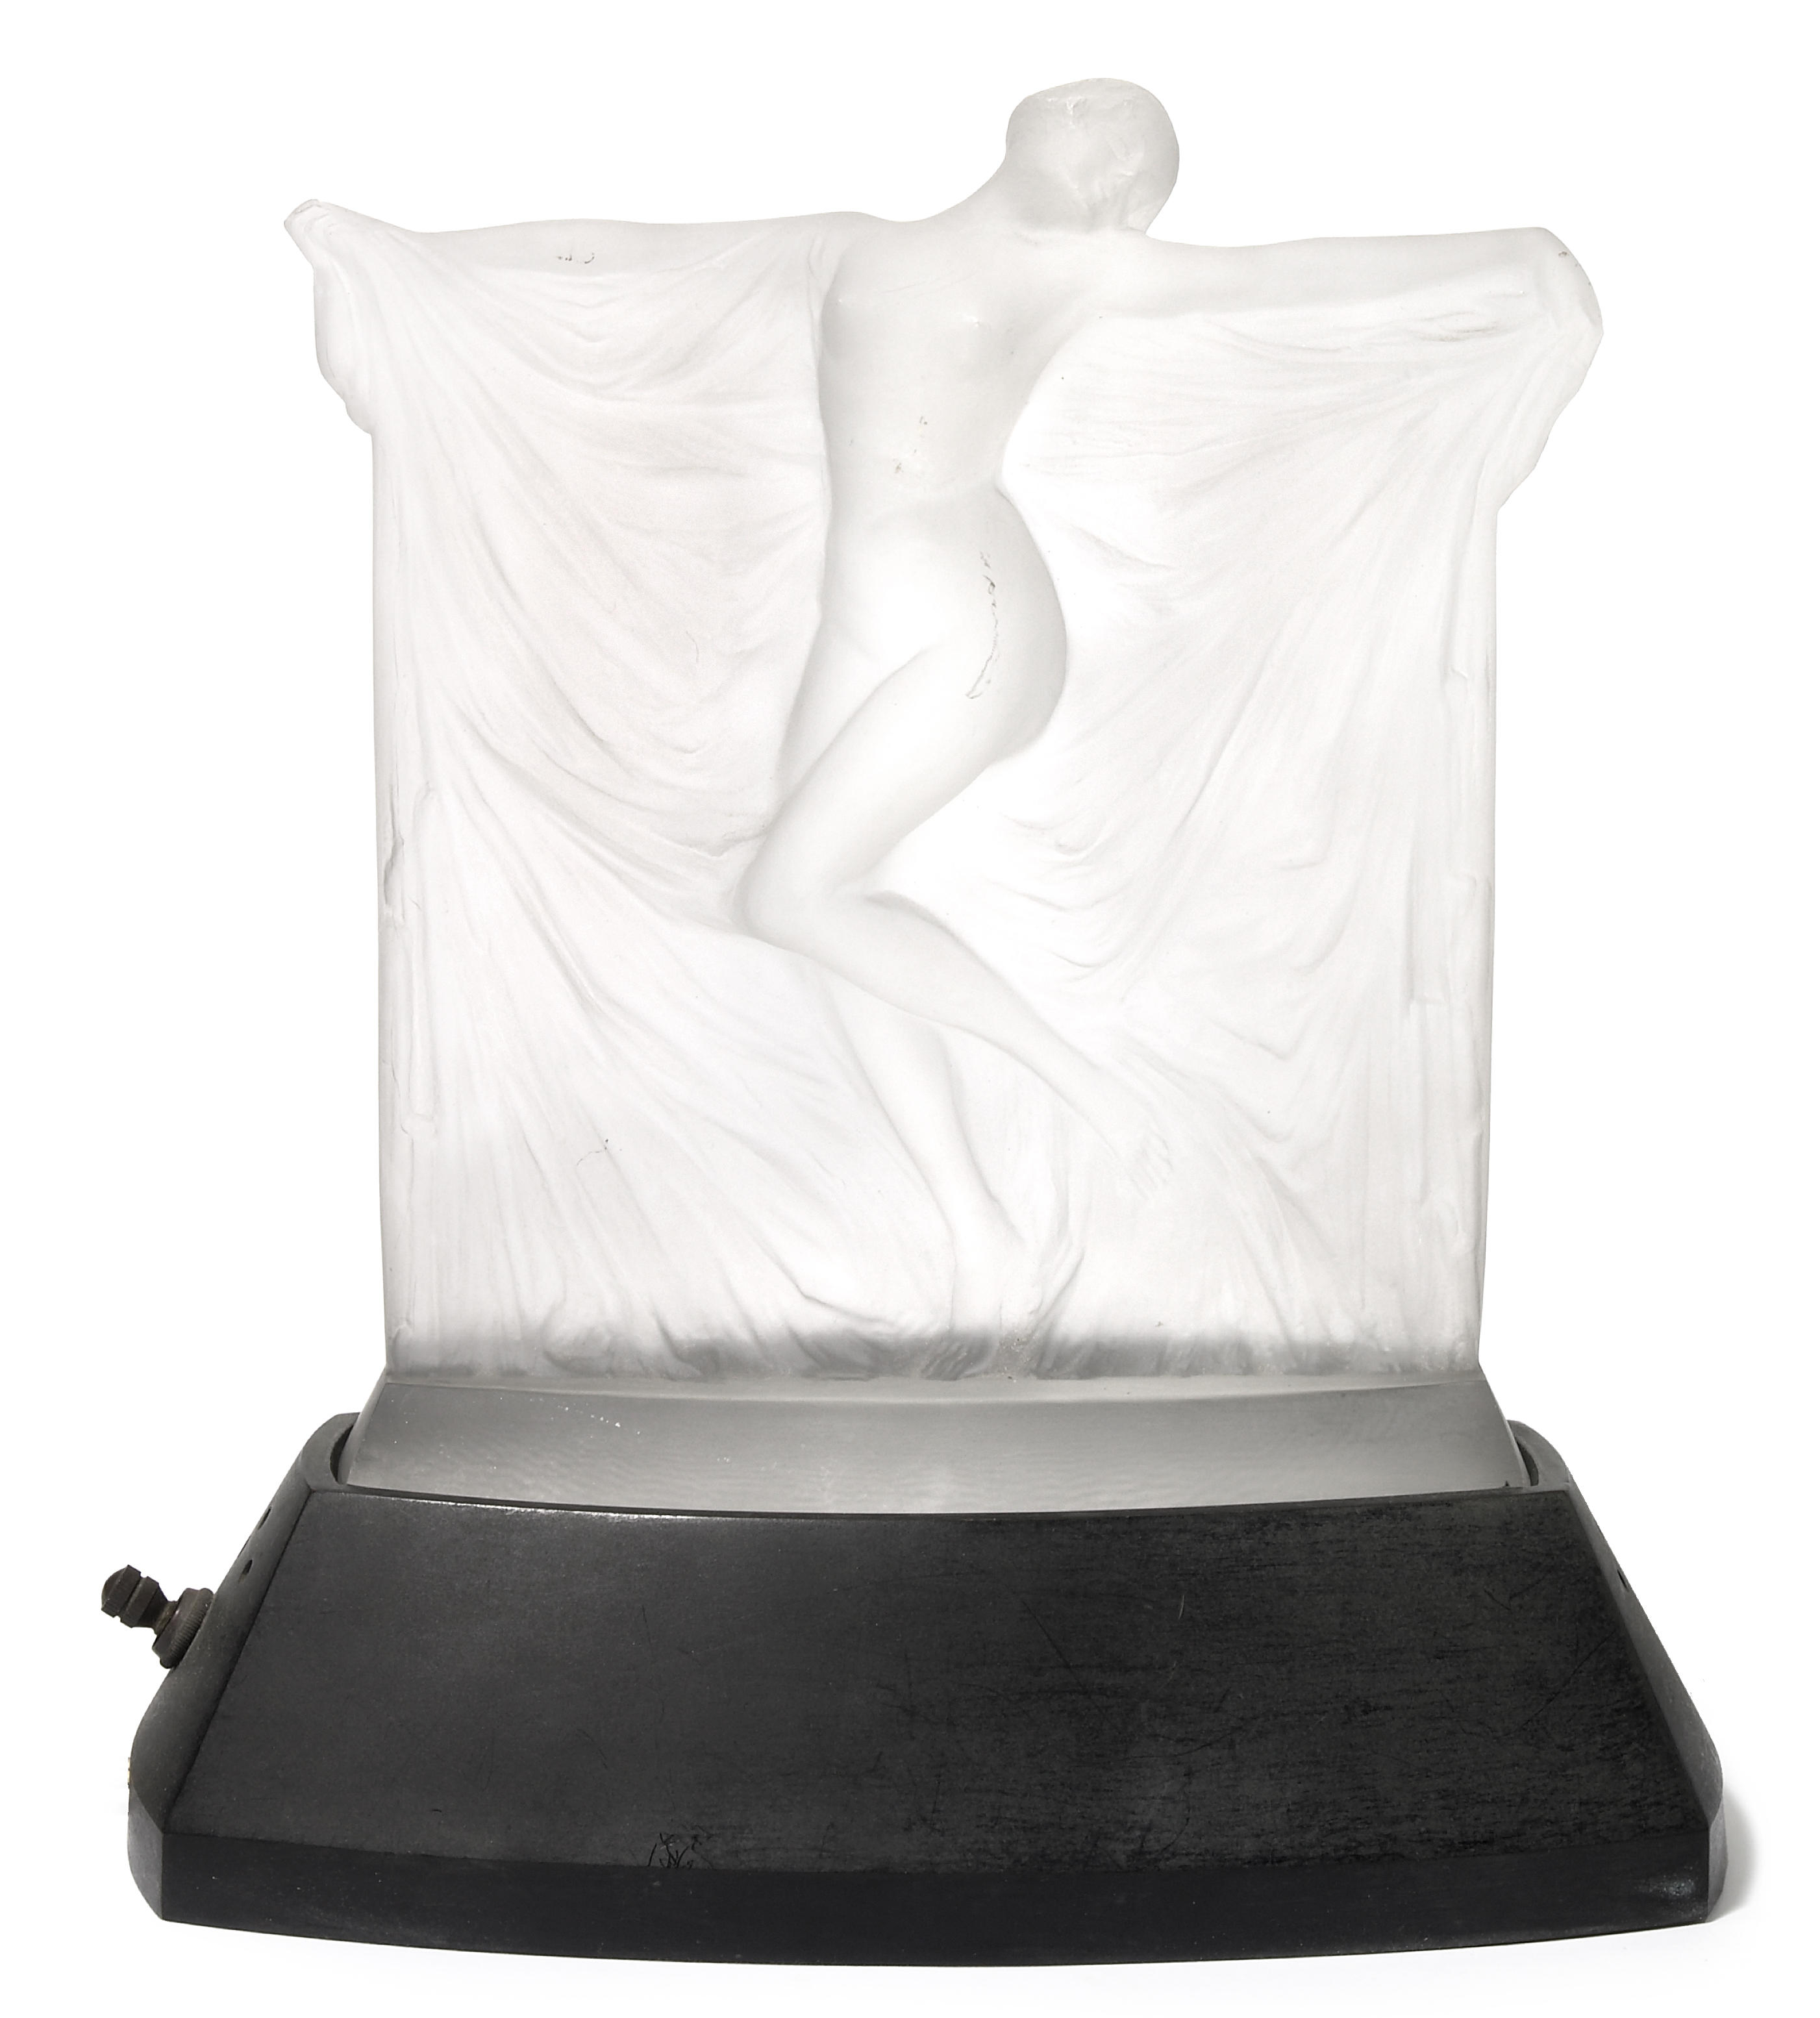 A Ren Lalique frosted glass statuette: